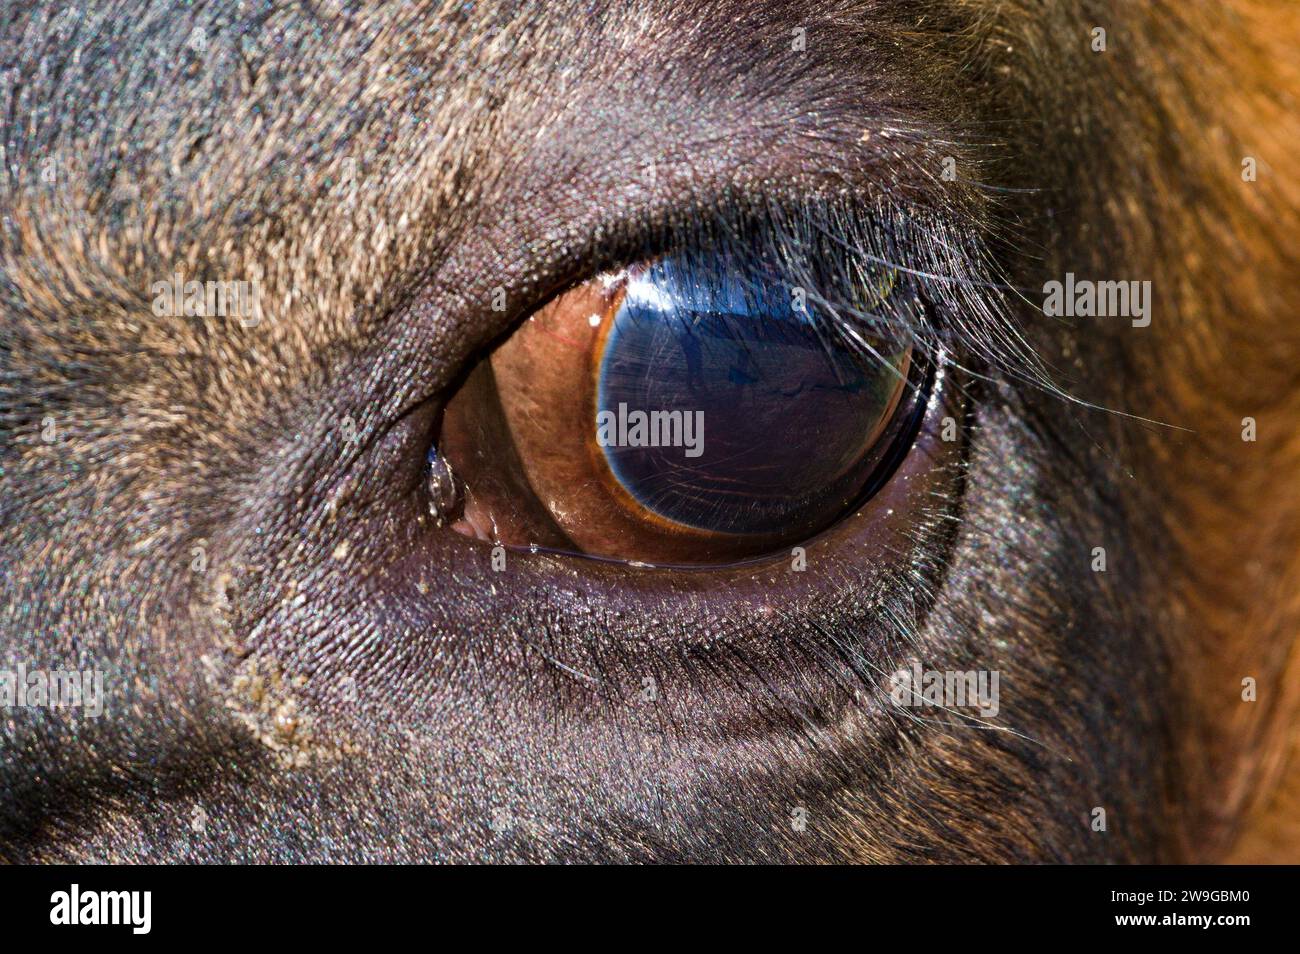 Close-up photo of cow, eye detail with reflection. Stock Photo